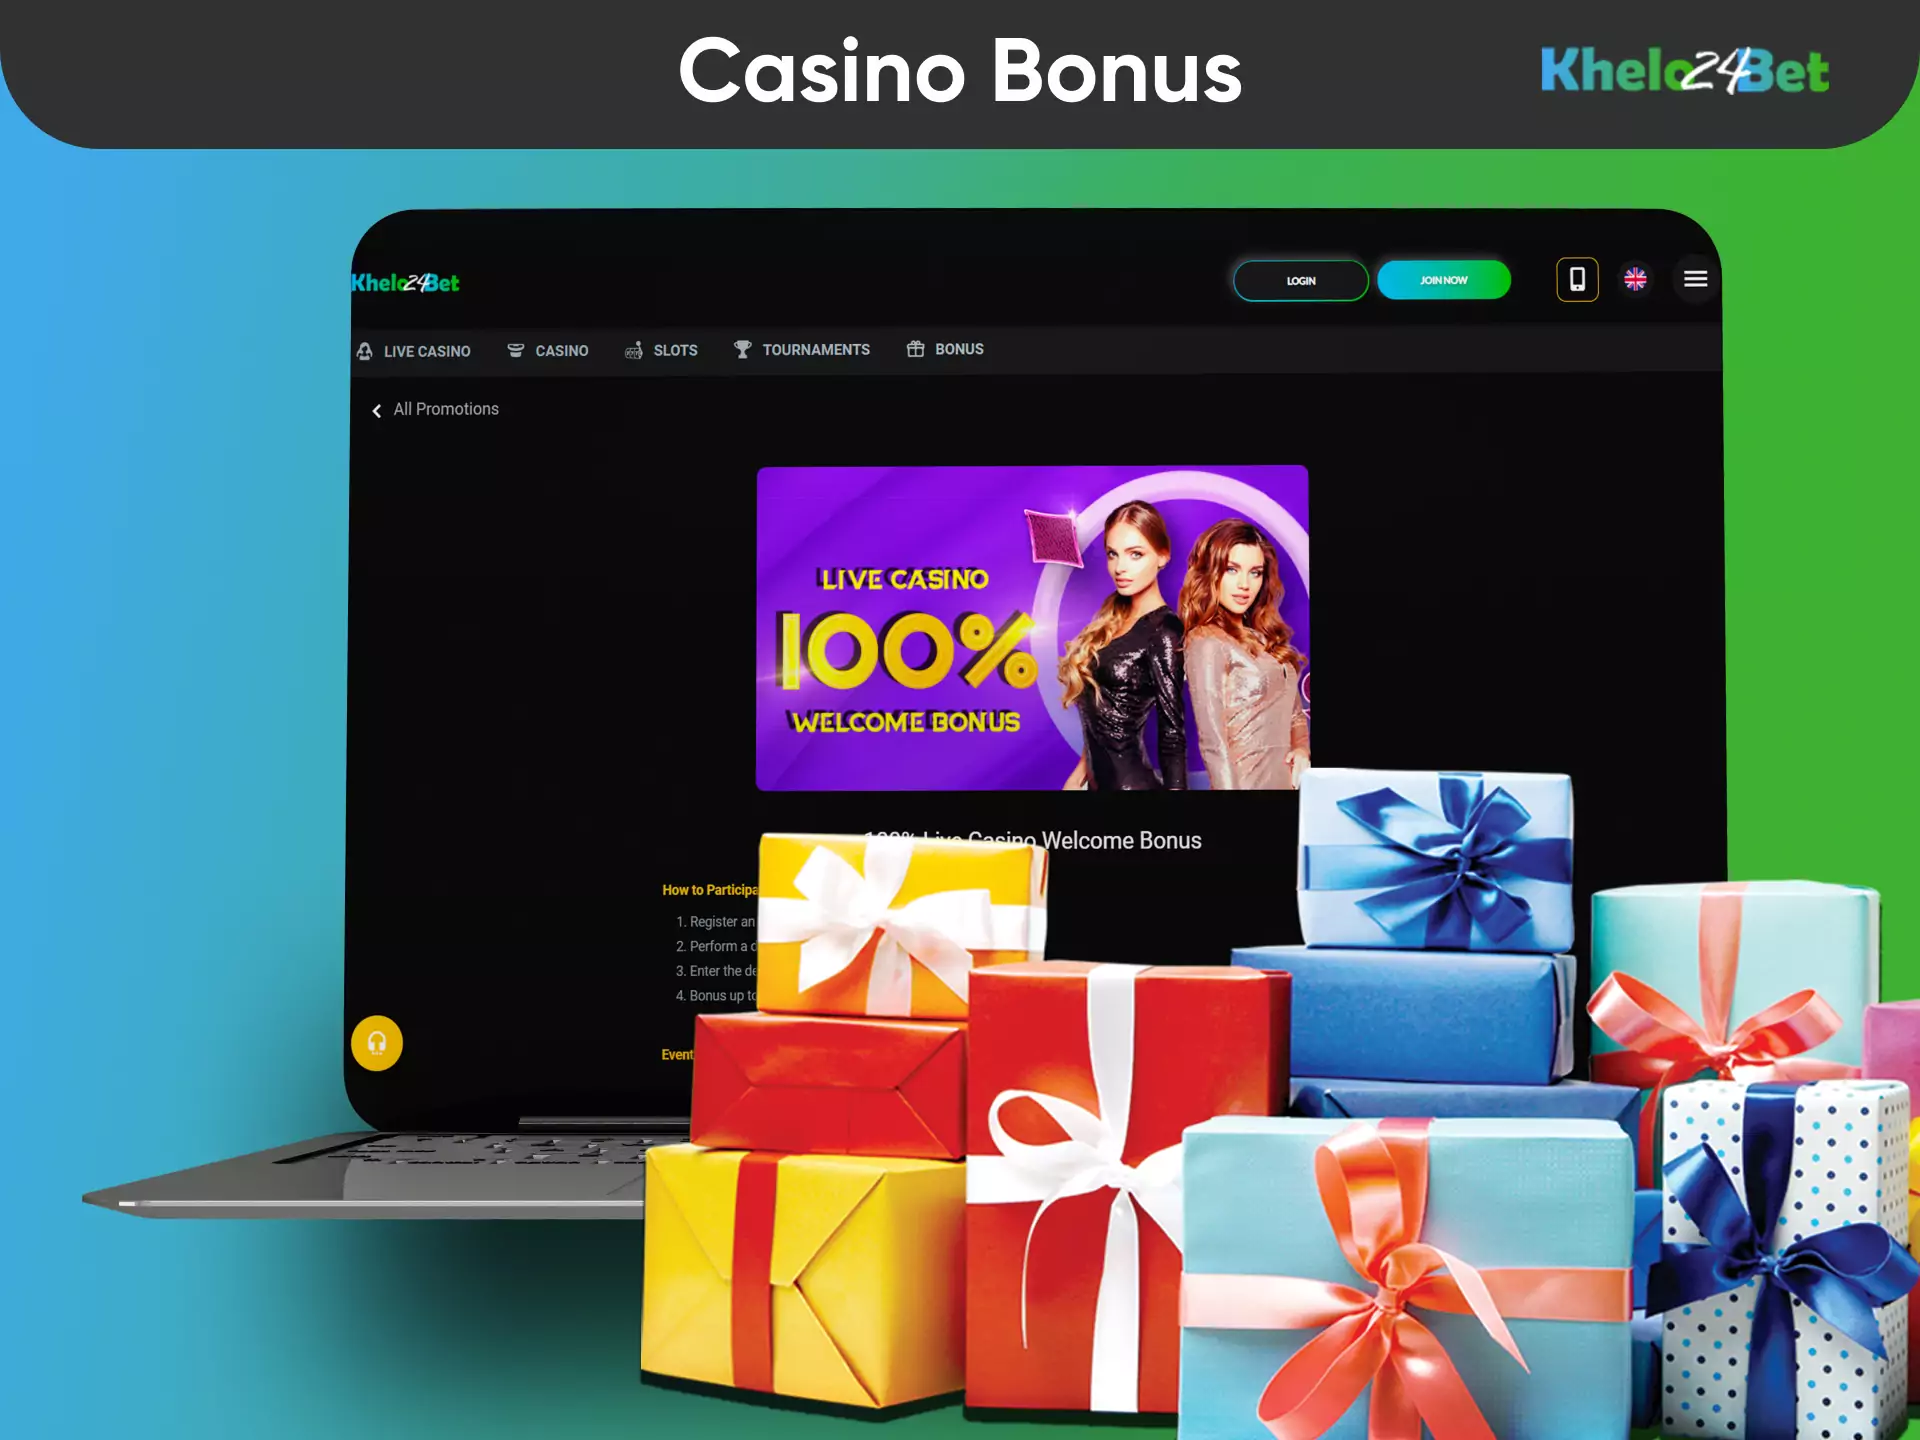 Casino players can get welcome bonuses and spend them on gambling on the Khelo24bet site.